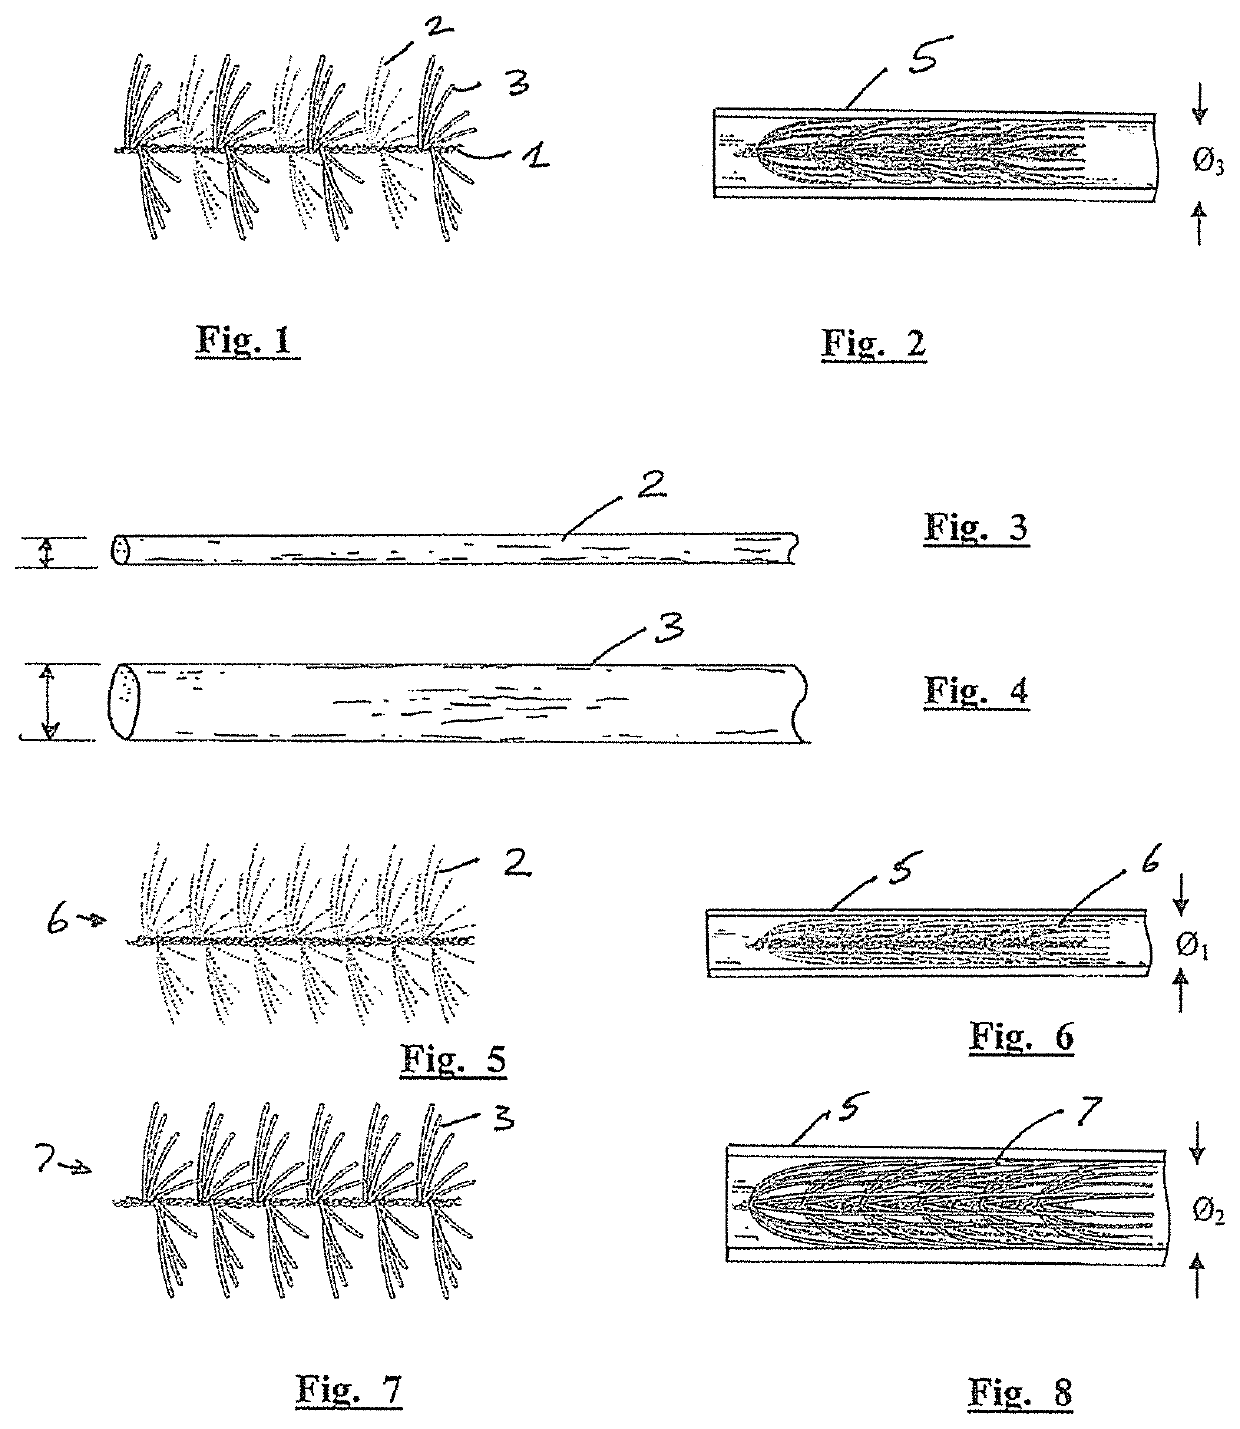 Embolisation systems